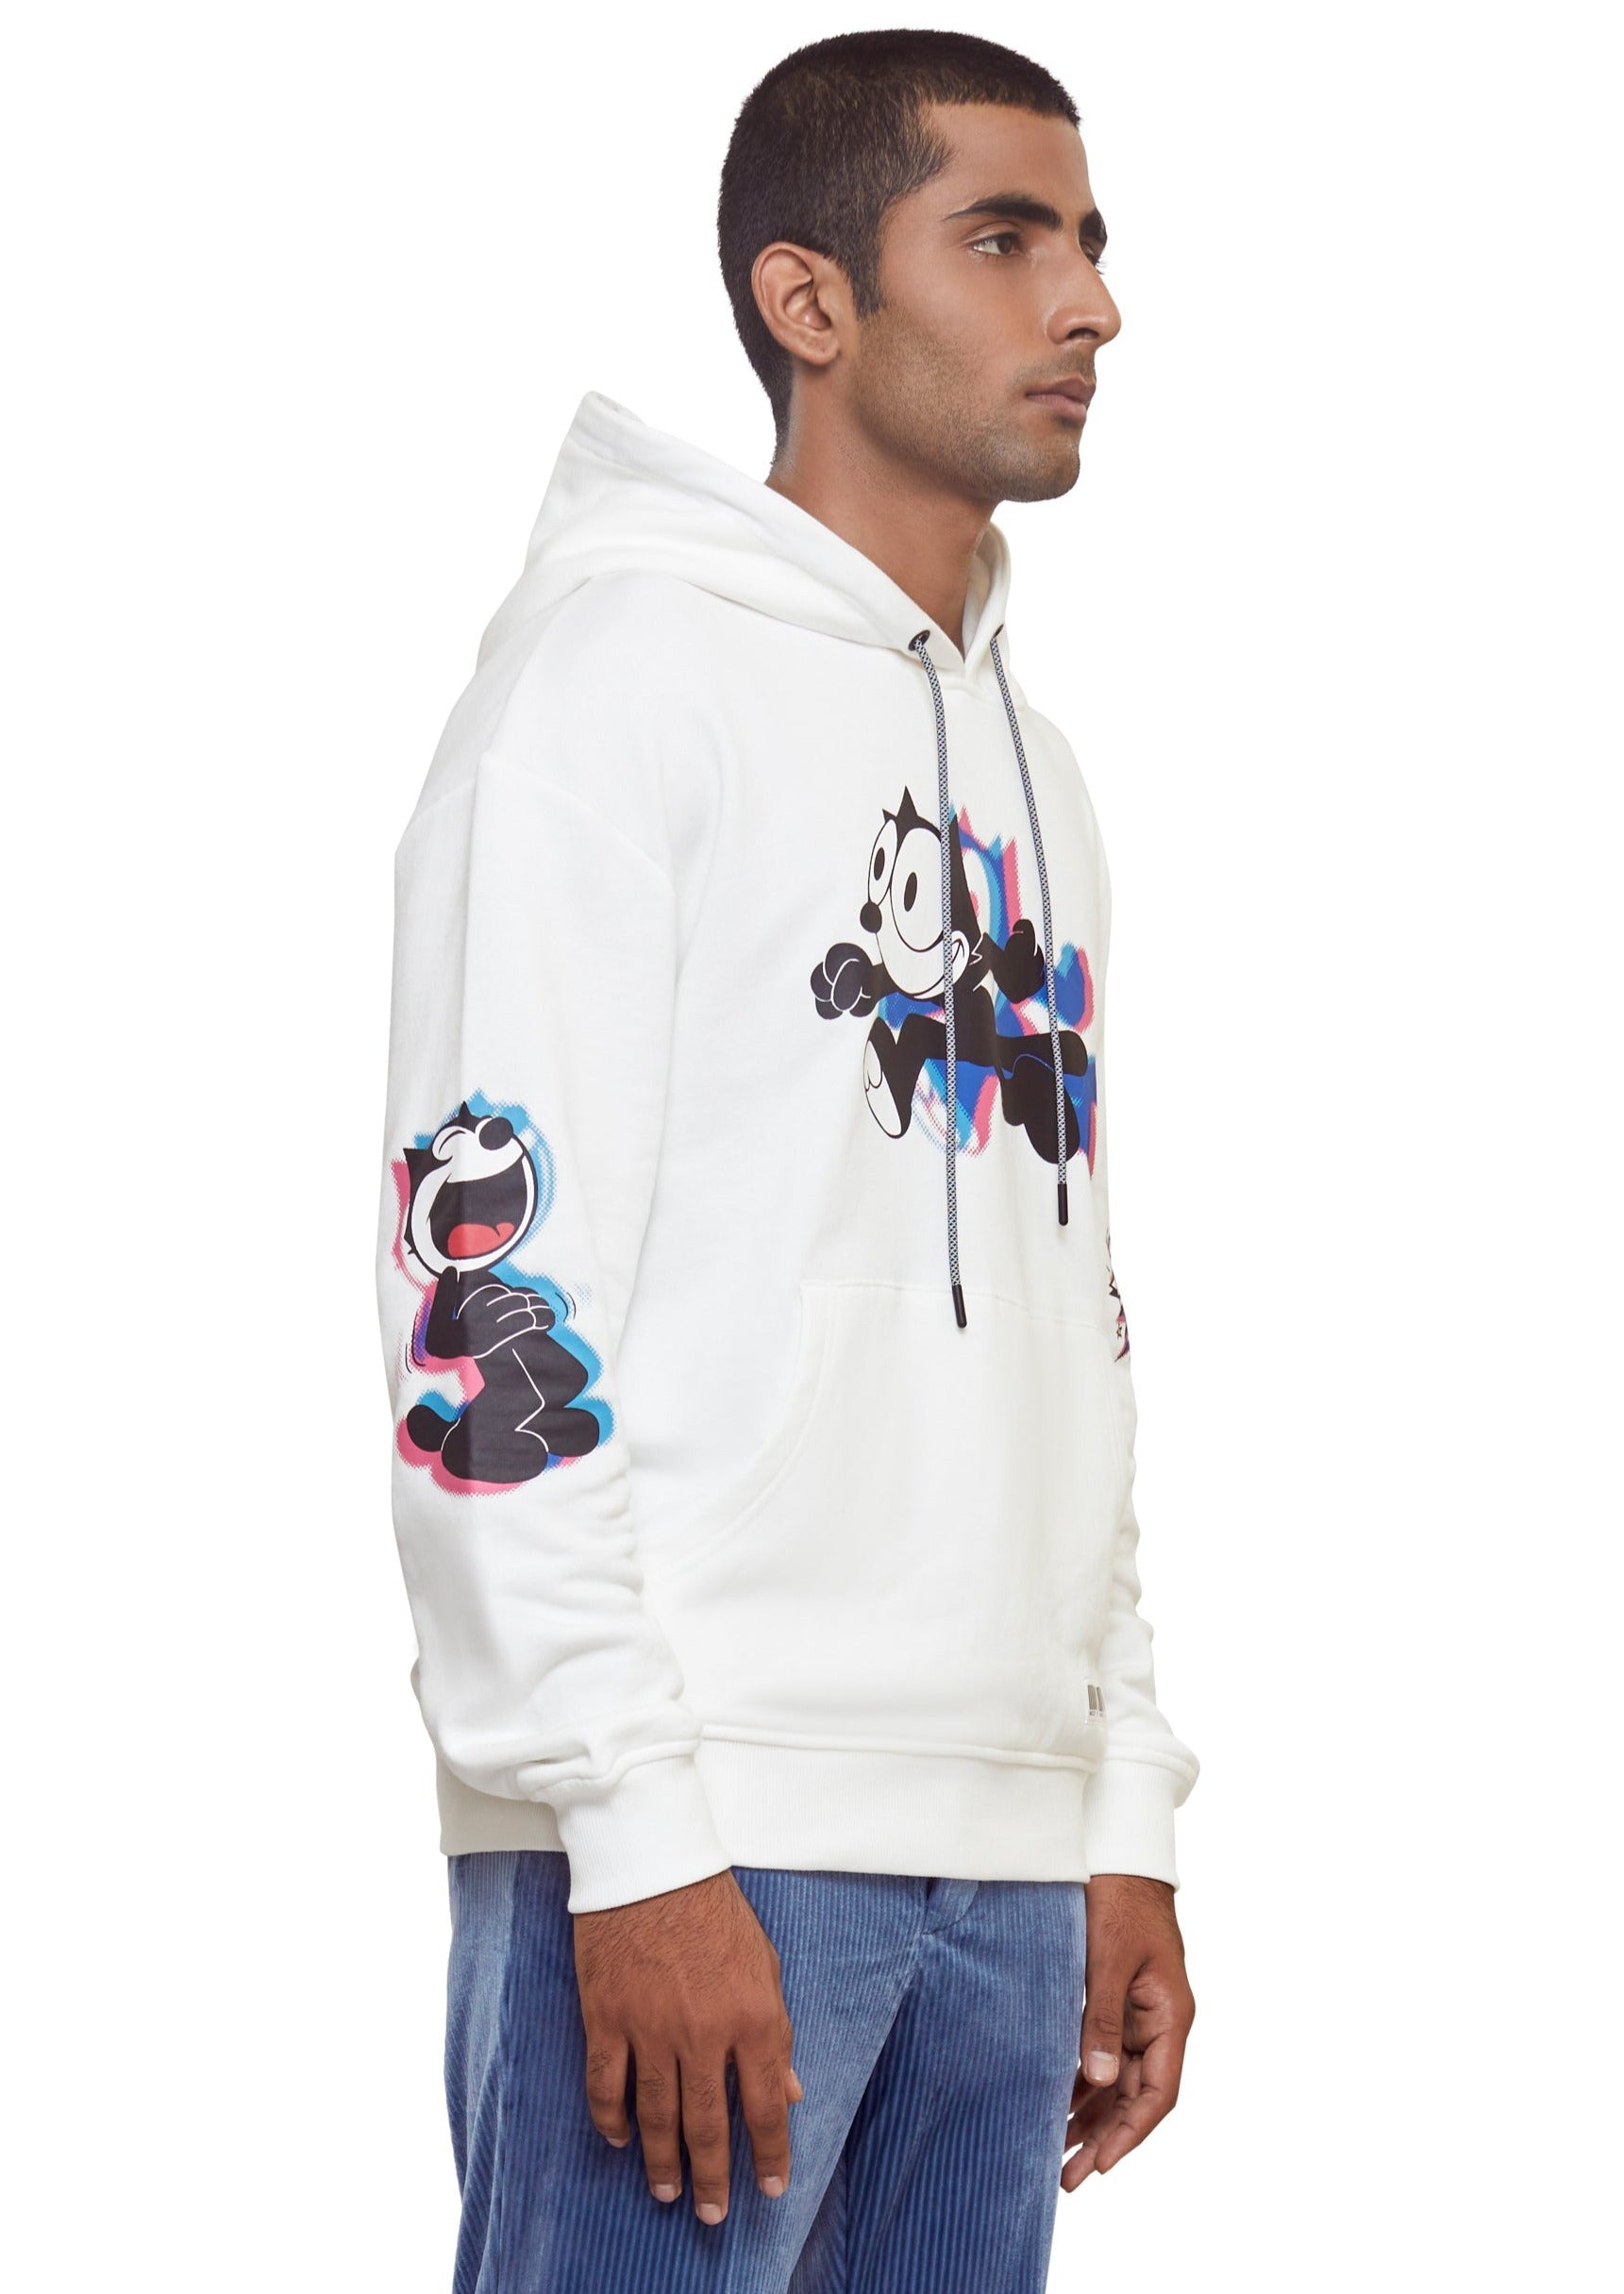 White Blurry felix the cat print Drop shoulder hoodie from the brand Mostly Heard Rarely Seen